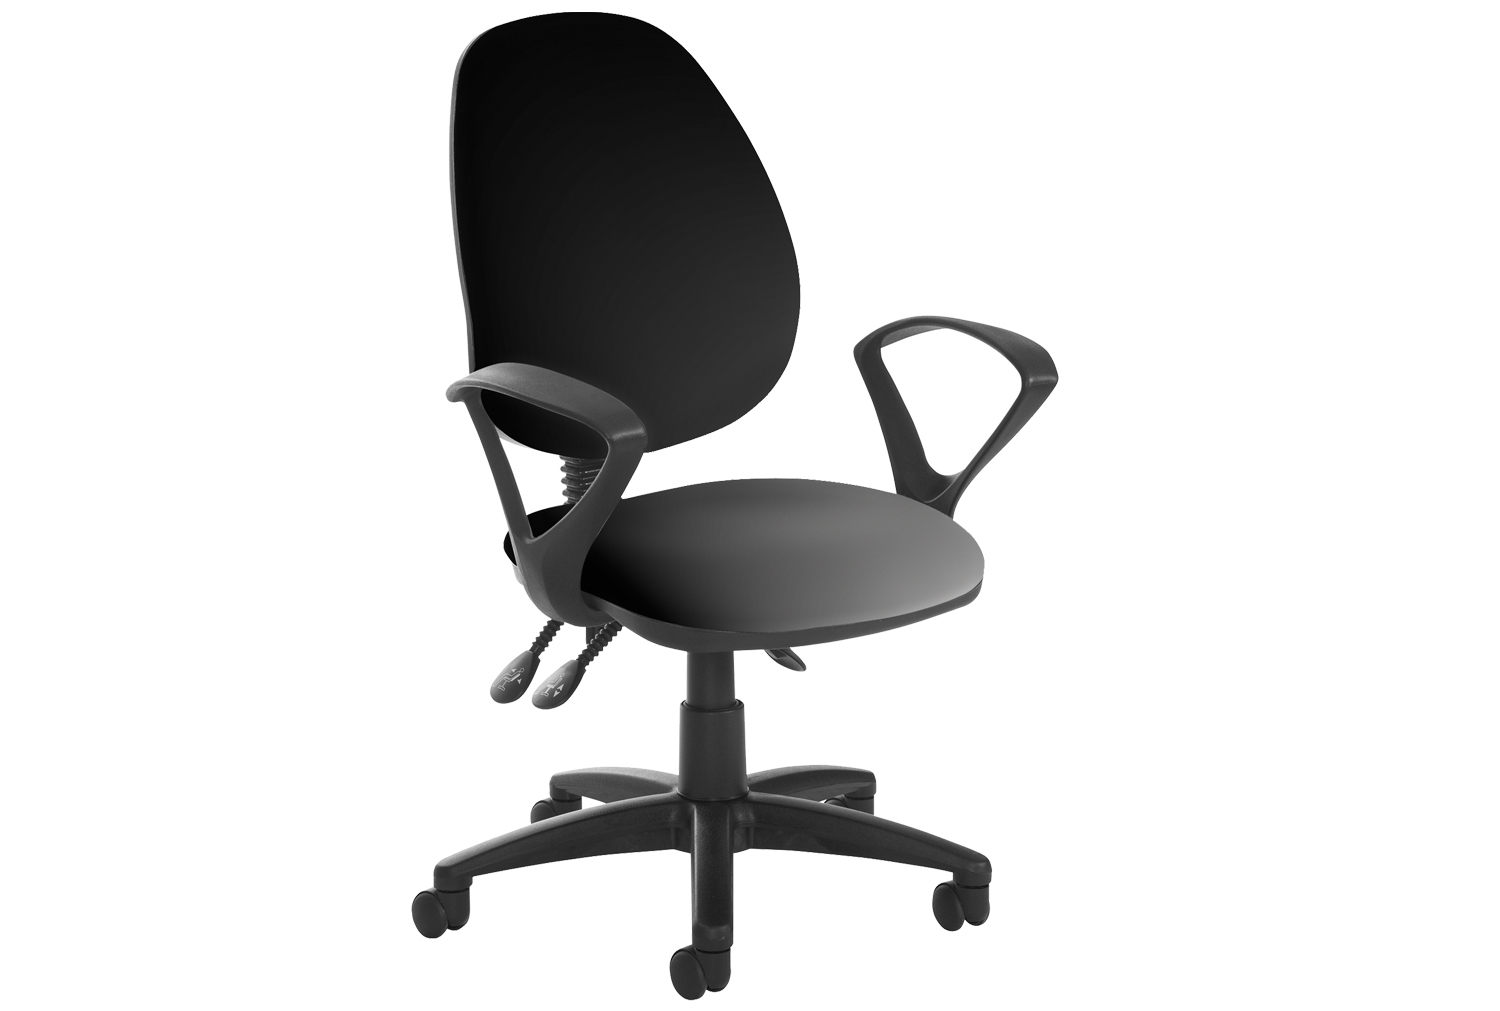 Vantage Plus High Back Asynchro Vinyl Operator Office Chair With Fixed Arms, Black